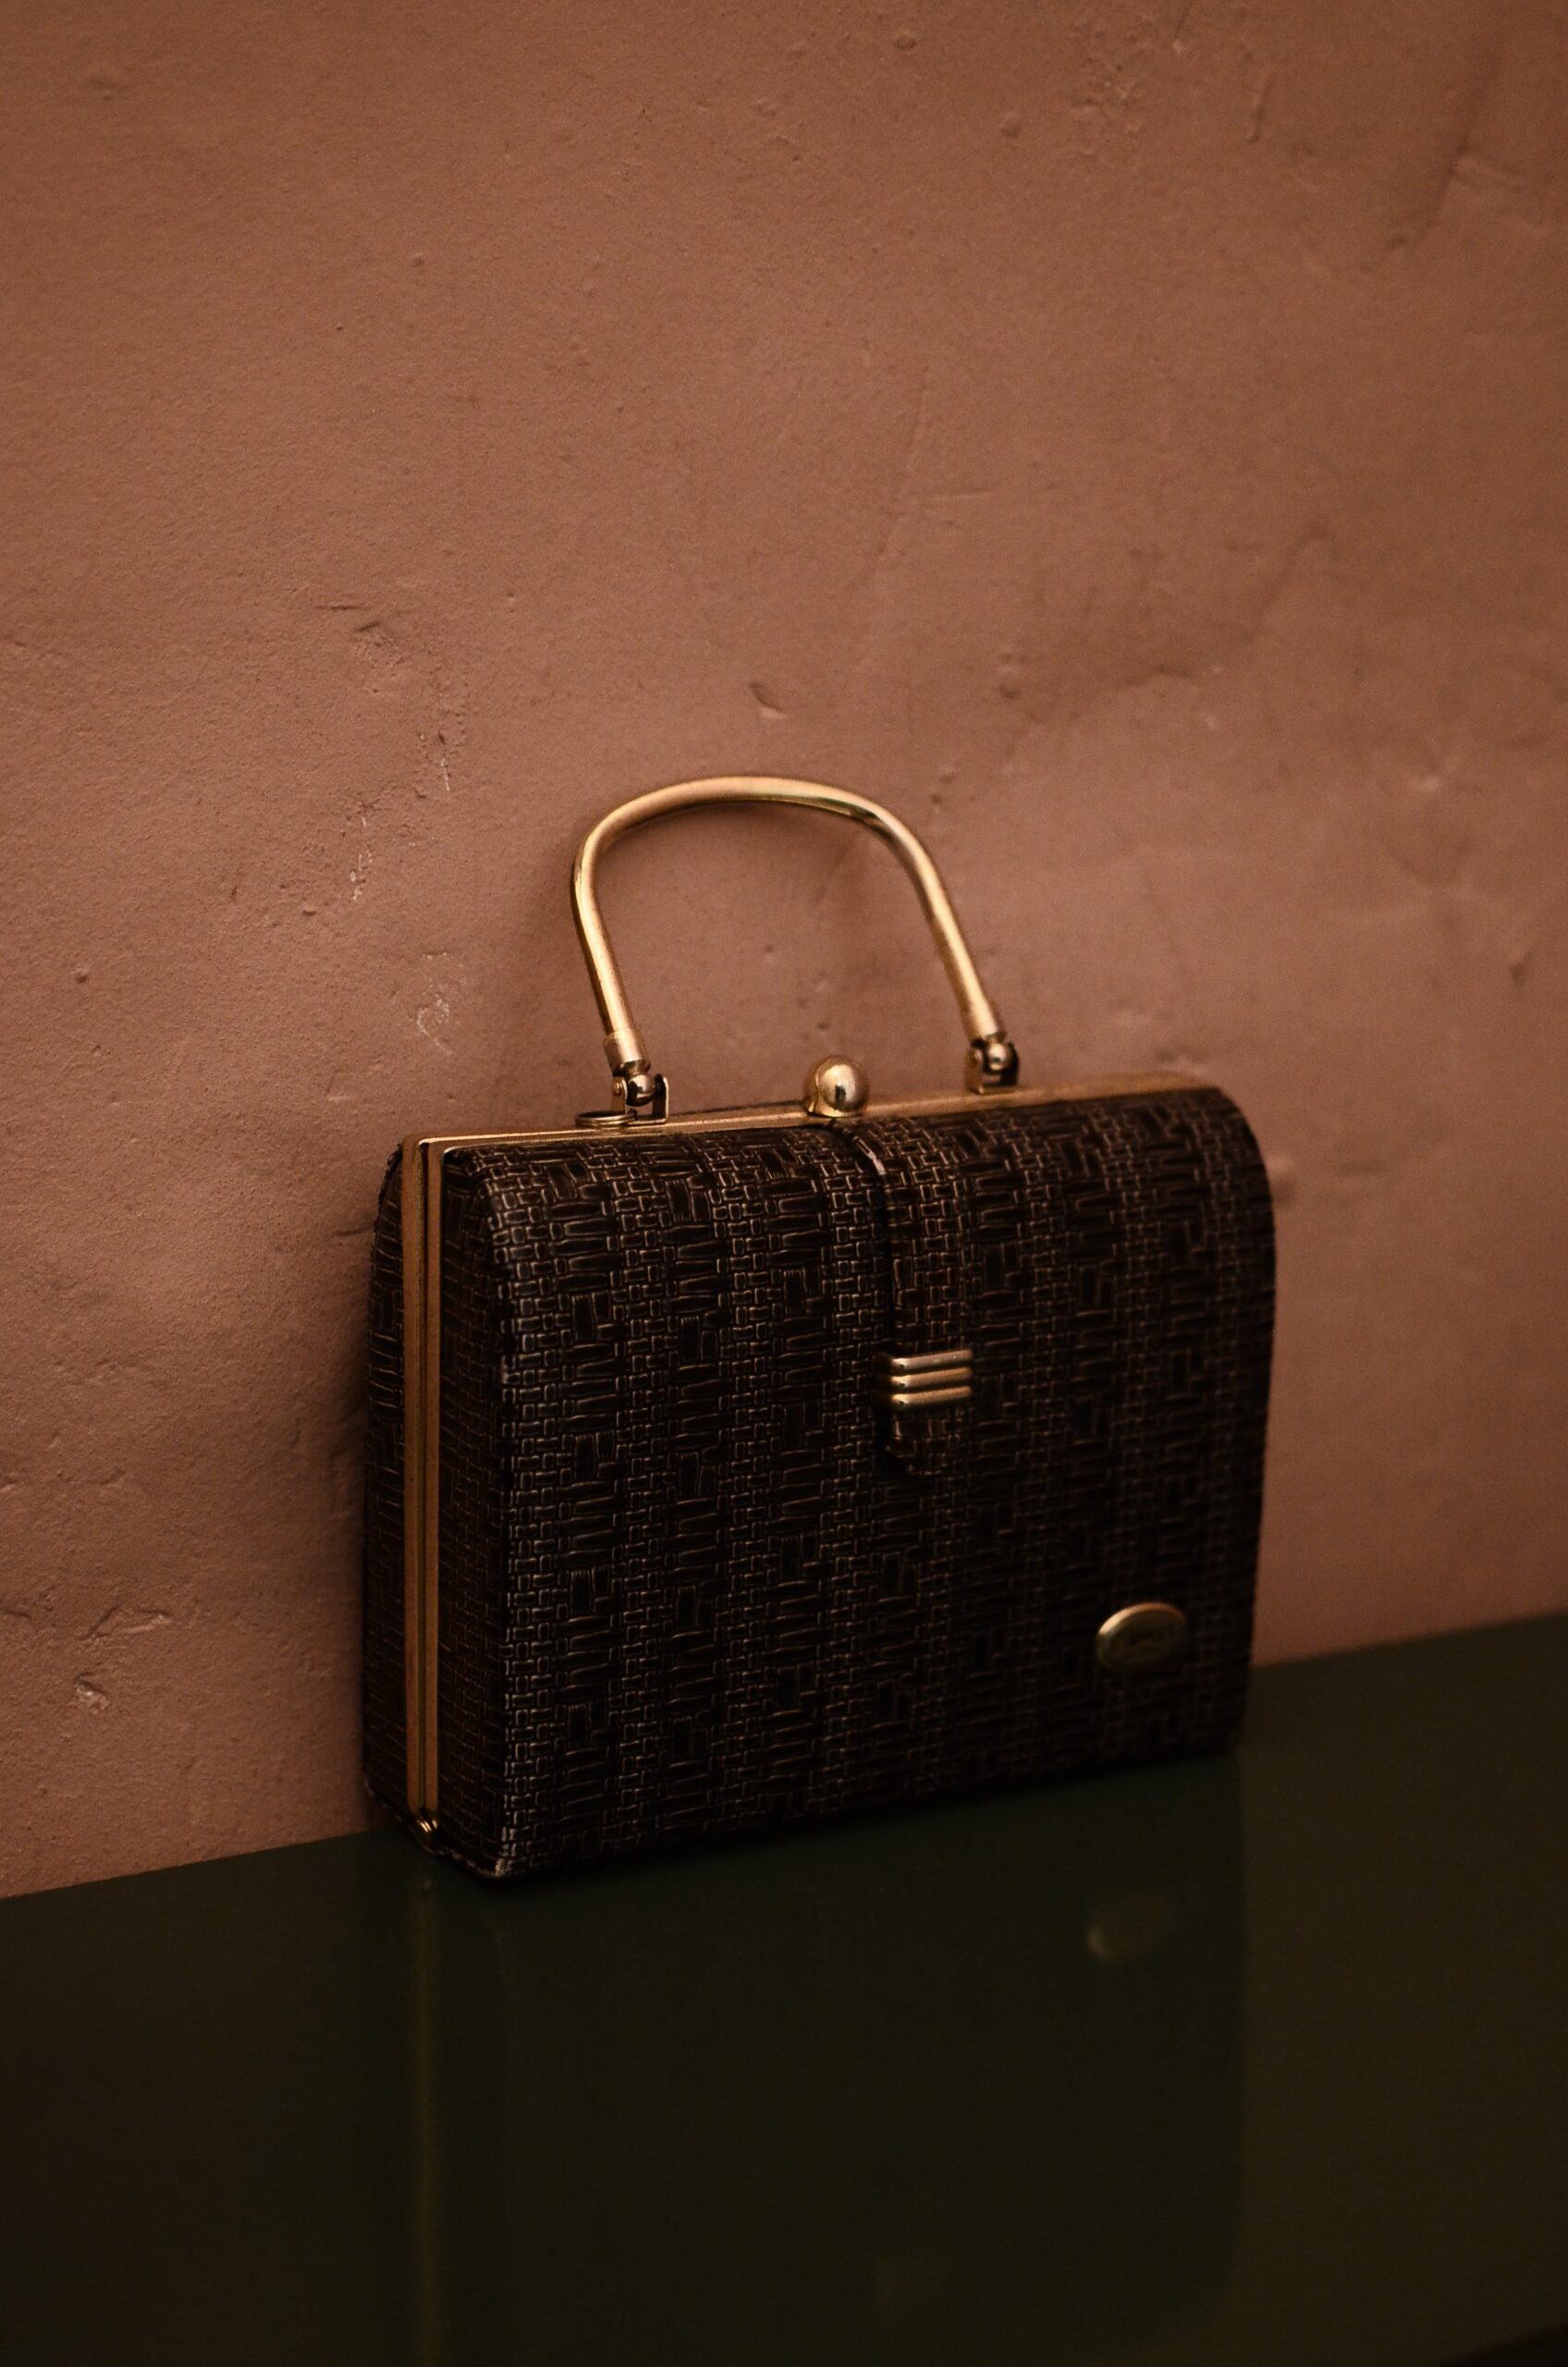 Top Handle Bag the models of luxury and elegance in mini size